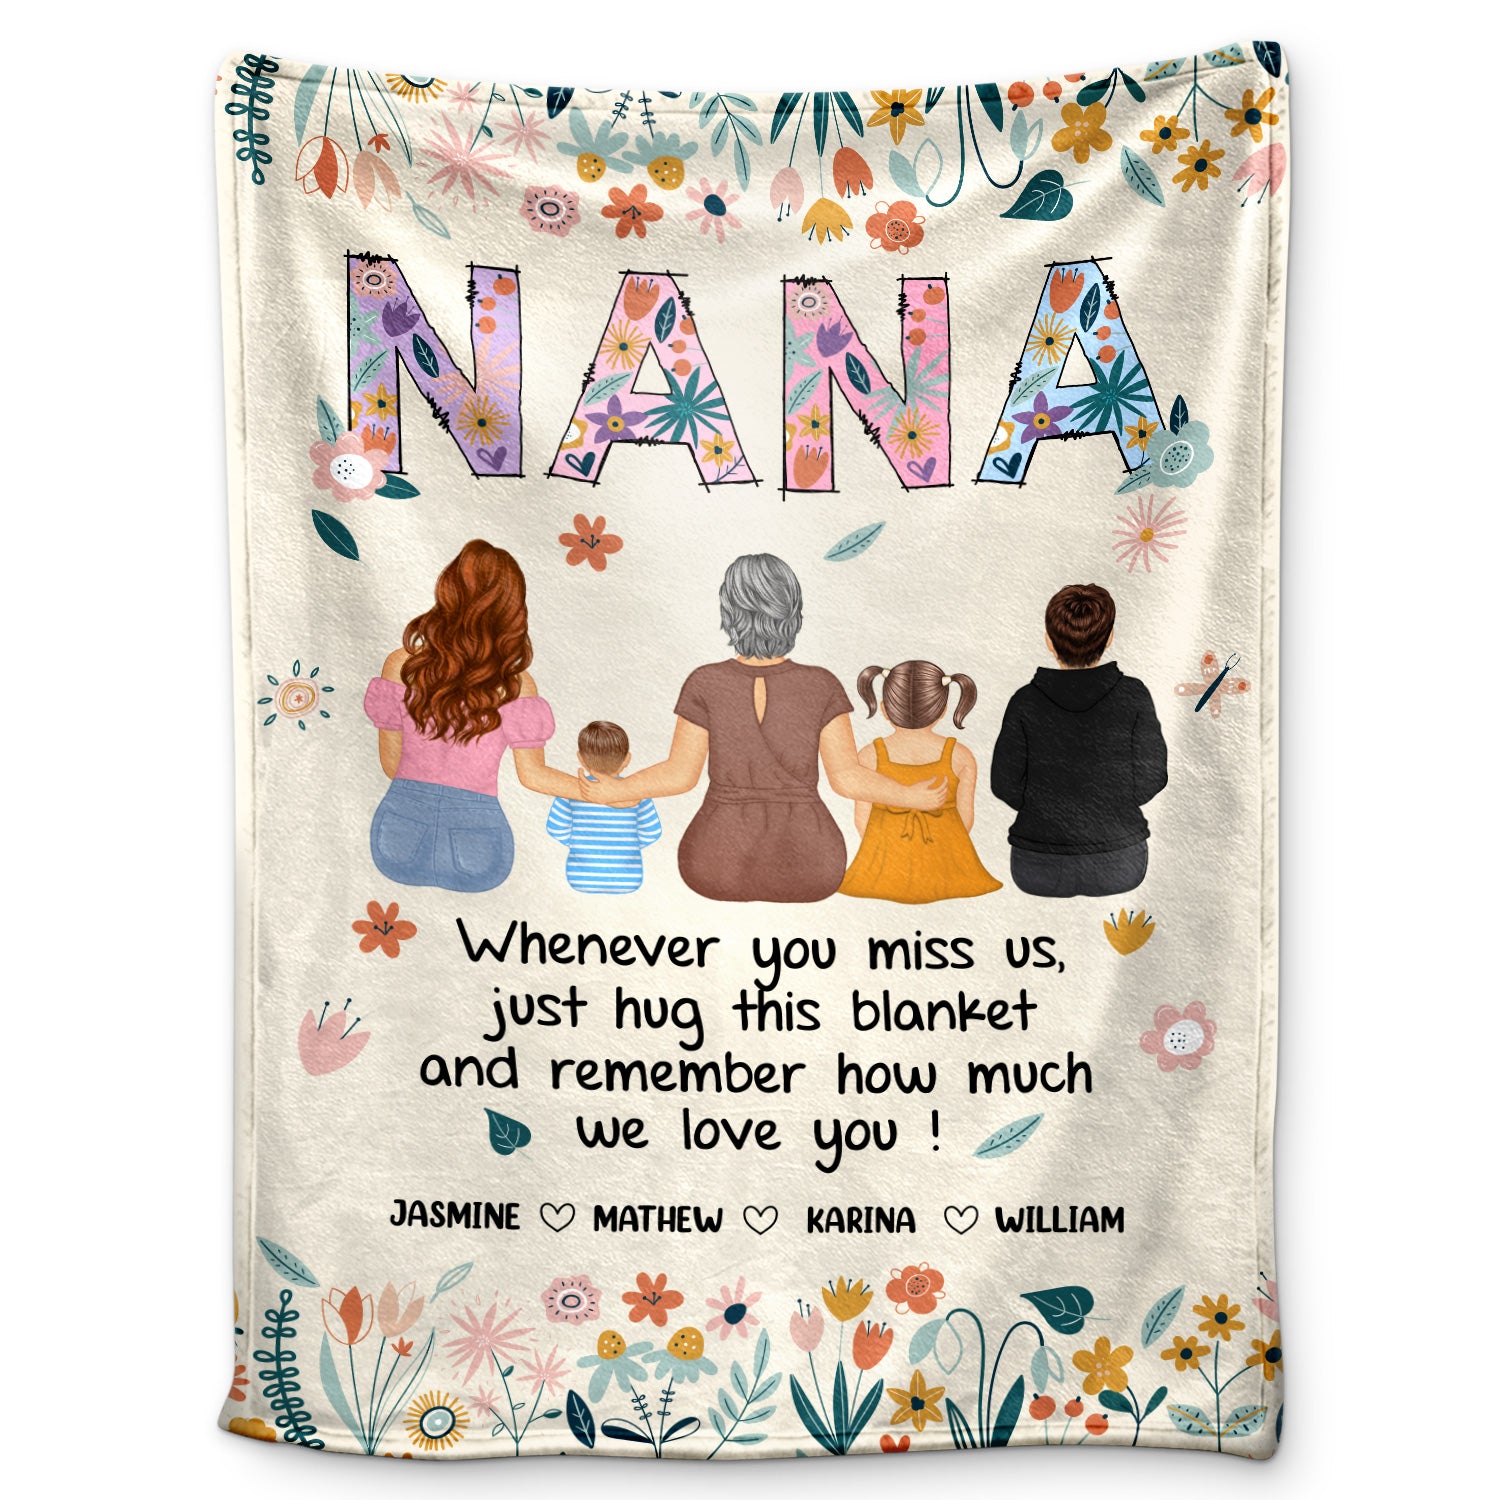 Remember How Much We Love You - Gift For Grandma - Personalized Fleece Blanket, Sherpa Blanket